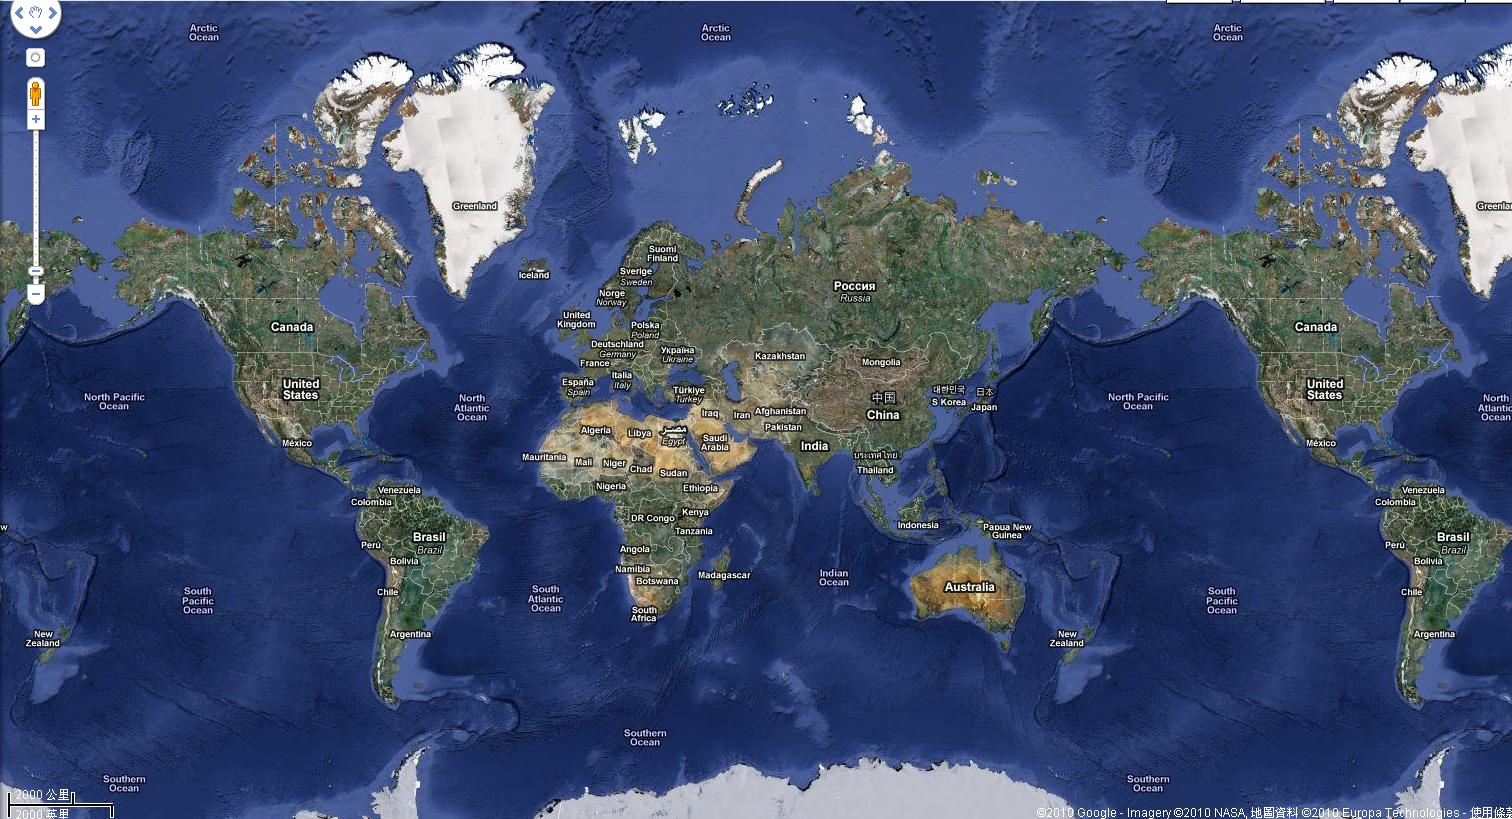 satellite google map of the world About Google Maps How Google Maps Works Satellite Map Google Earth satellite google map of the world